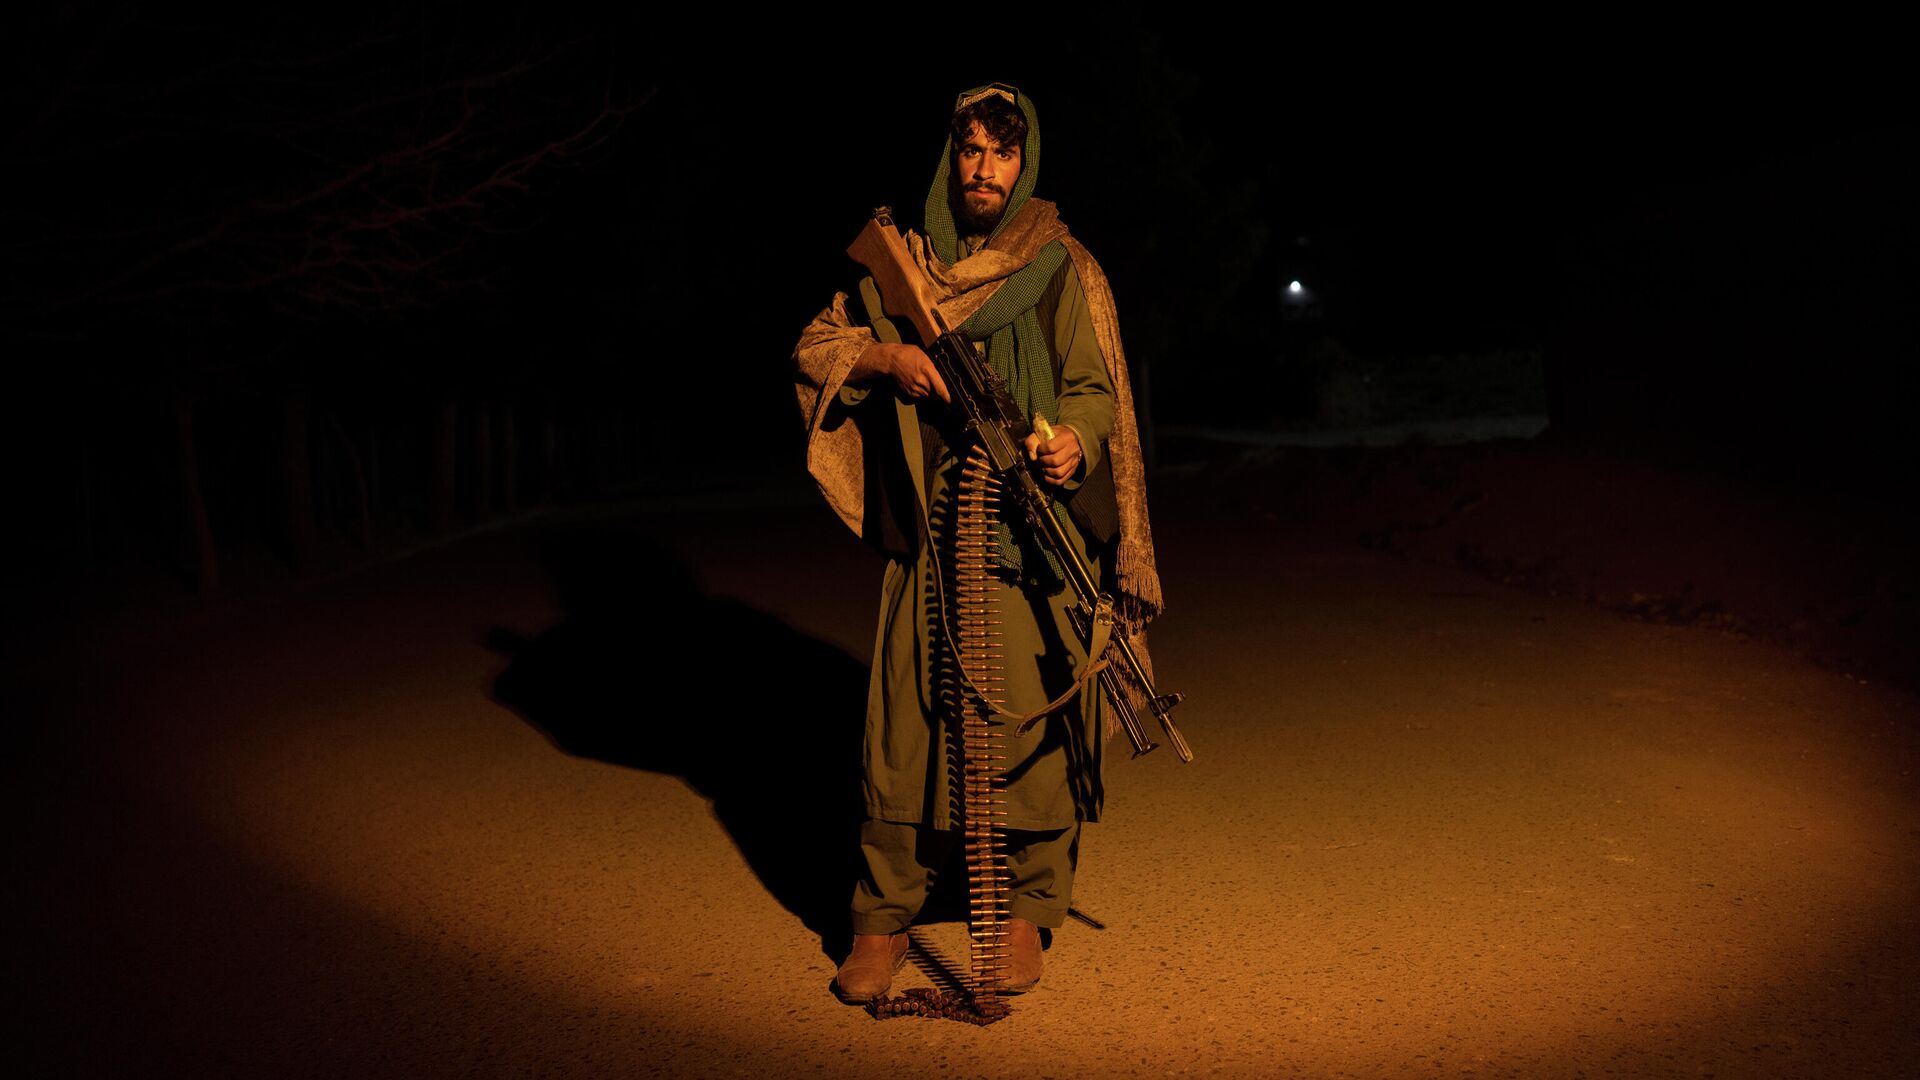 A Taliban fighter poses for a photo at a check point in Herat Afghanistan, on Monday, Nov. 29, 2021 - Sputnik International, 1920, 24.01.2022